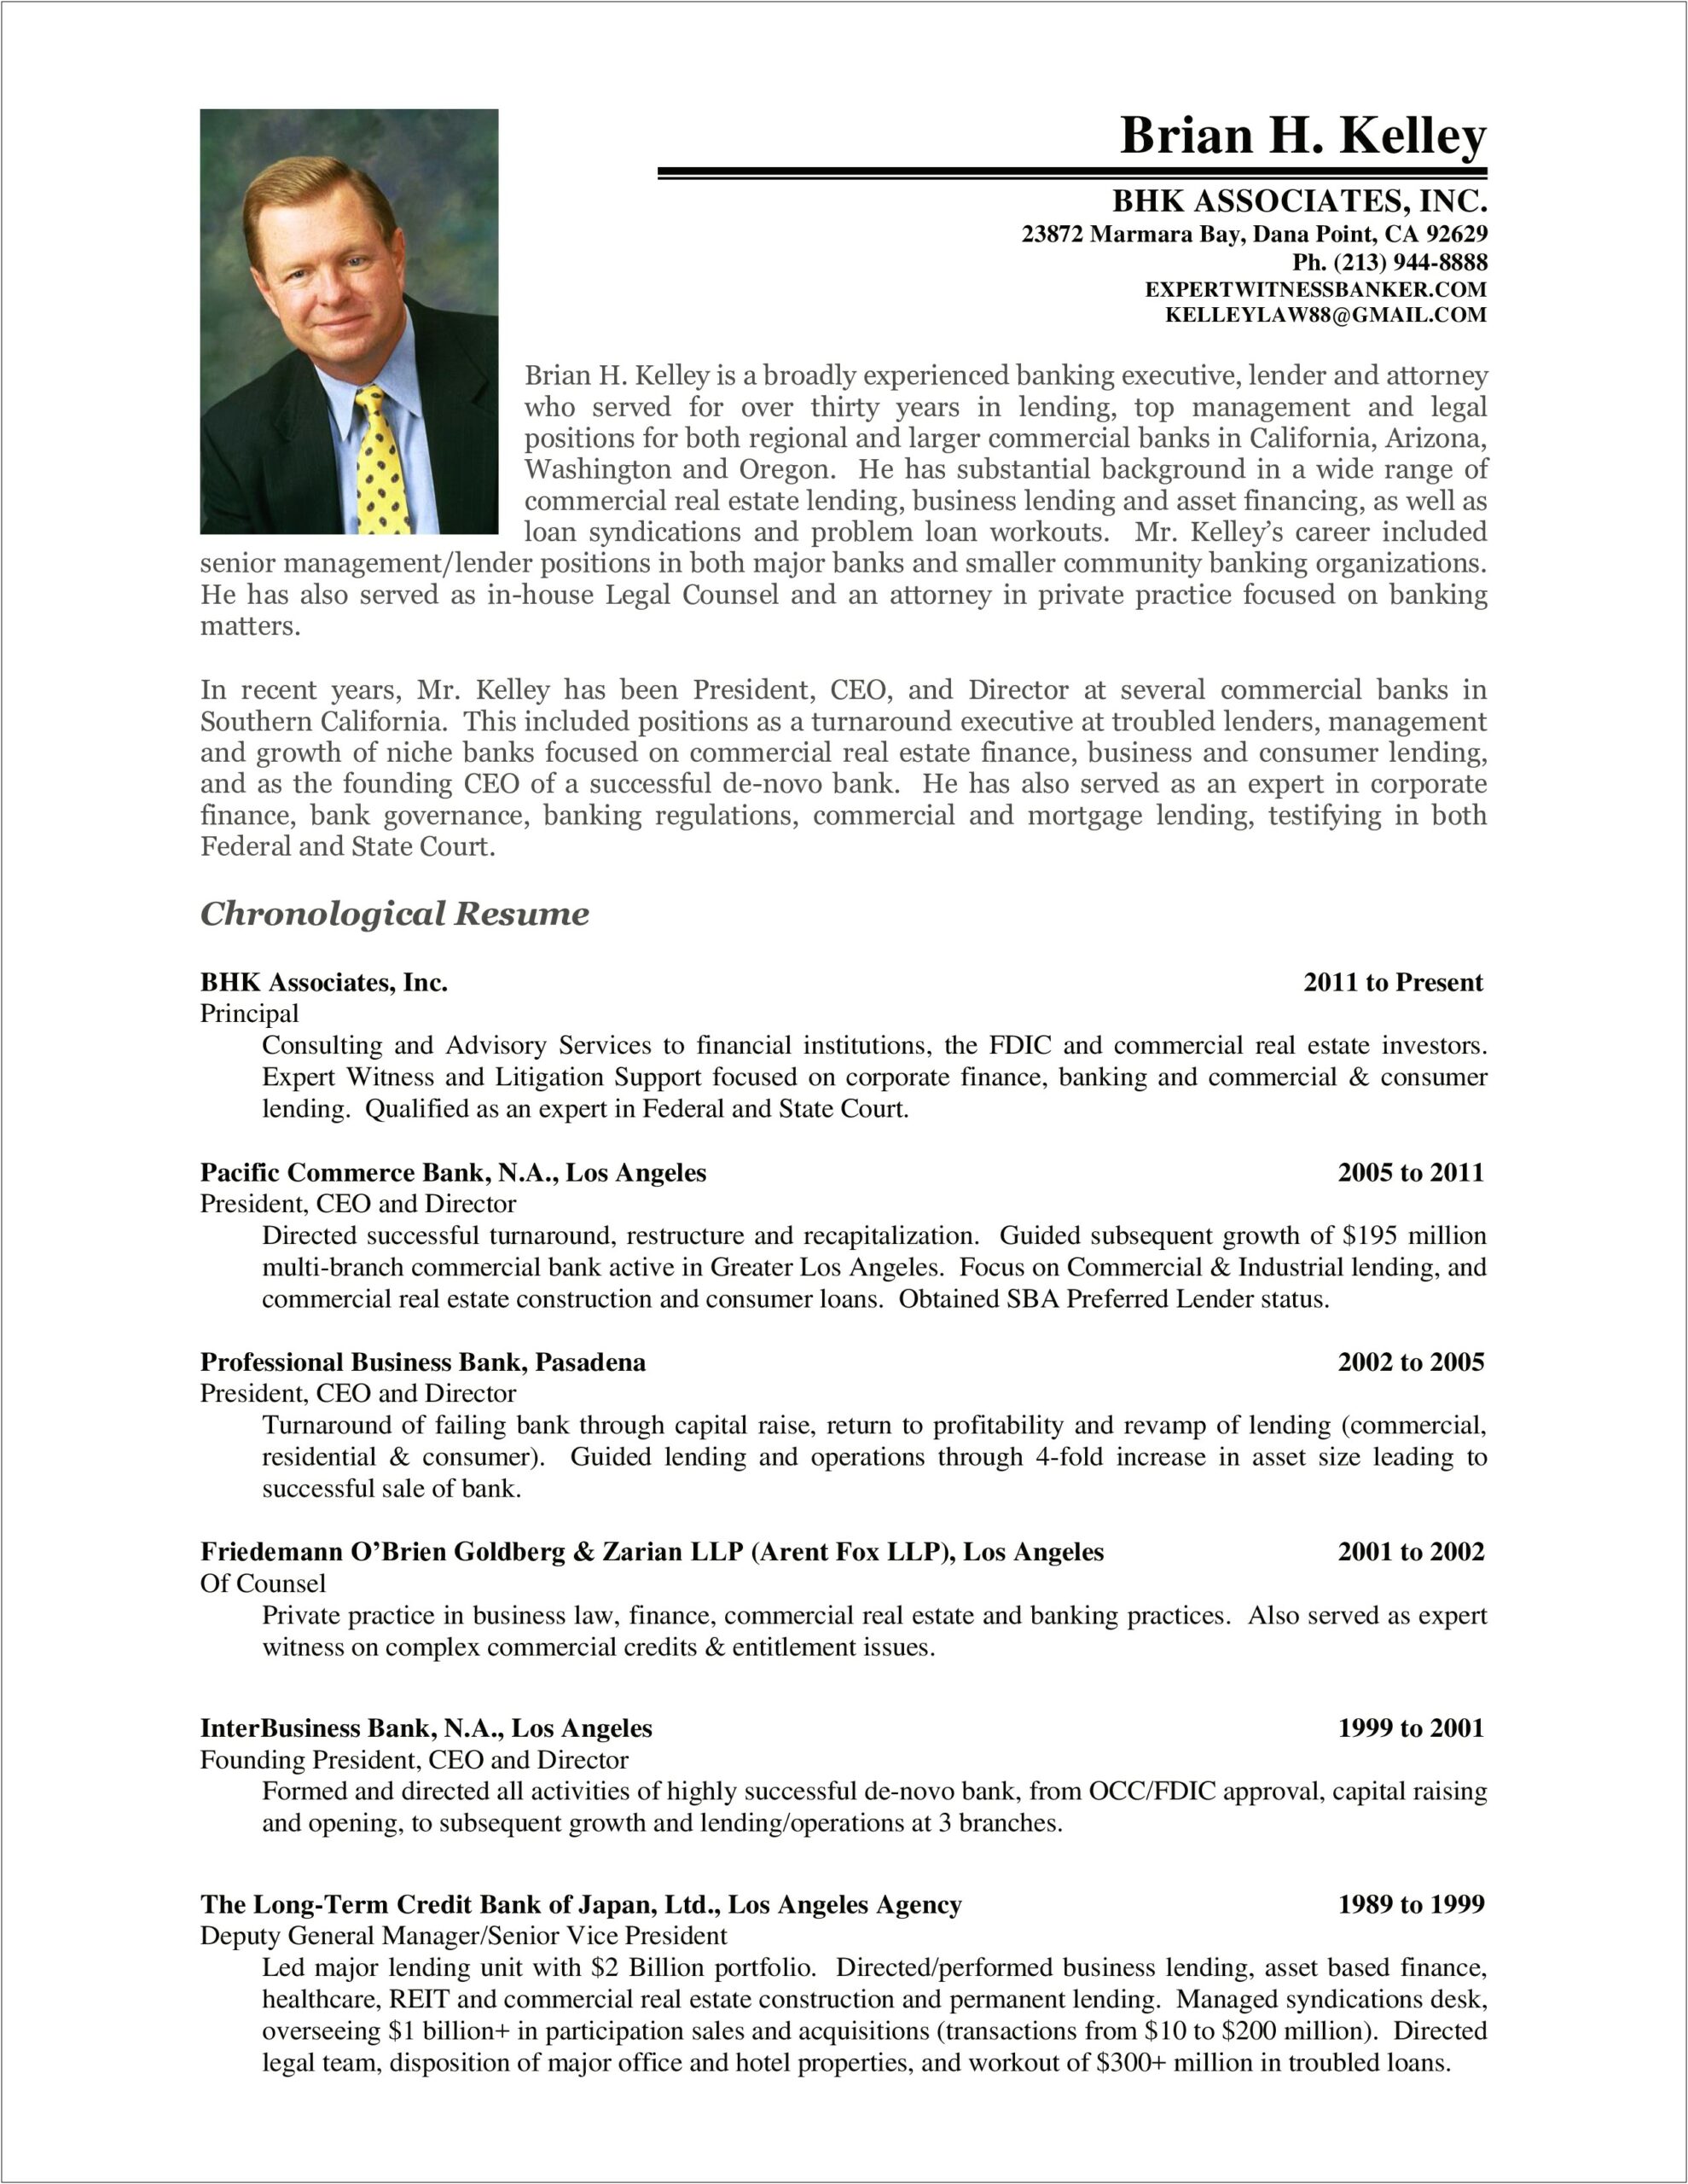 Resume Samples For President And Ceo